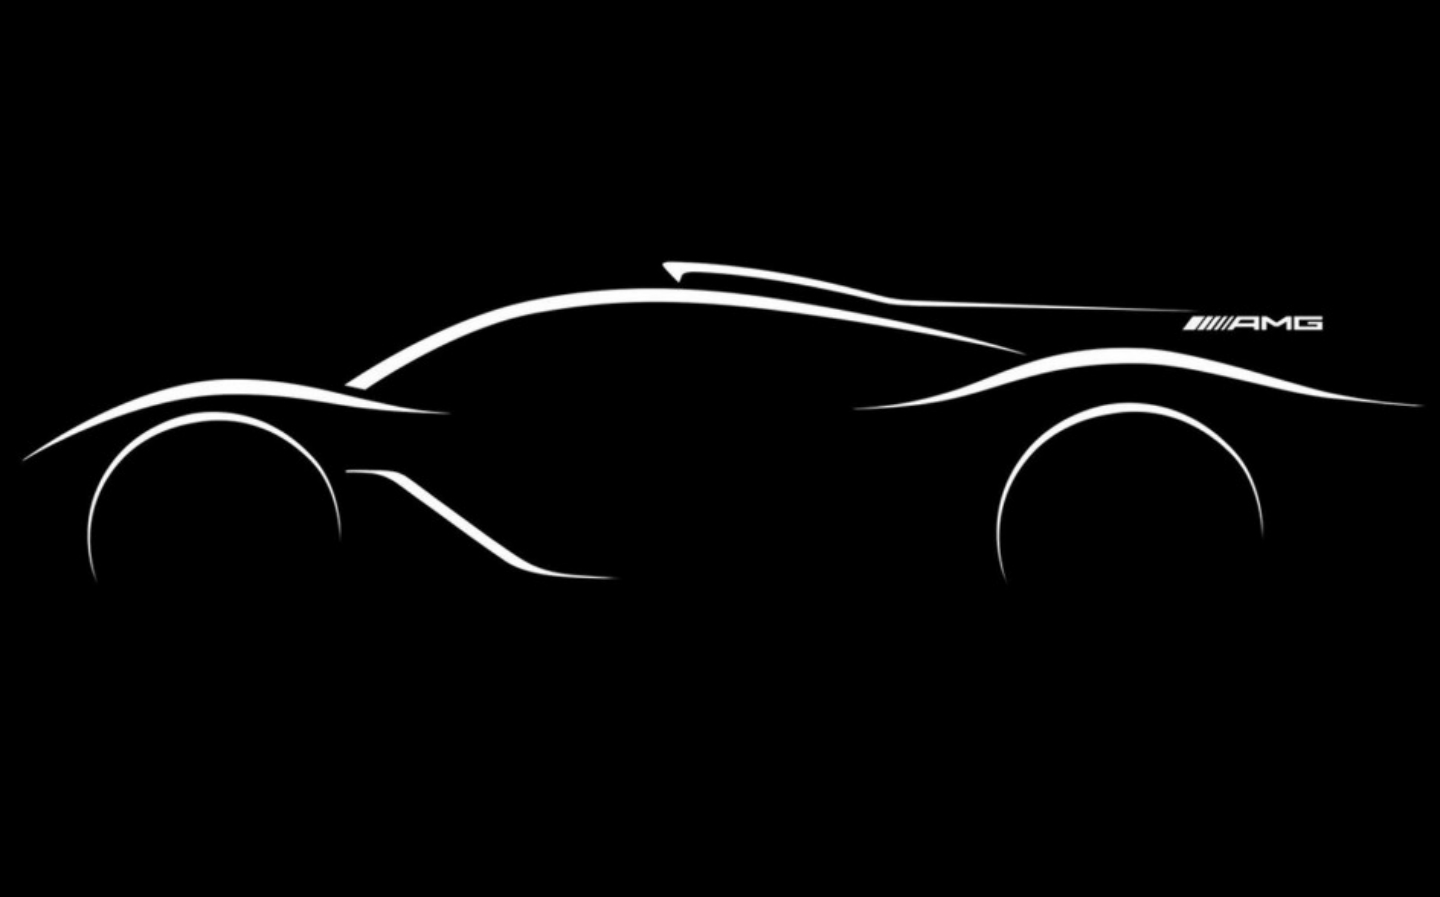 Approaching fast: Mercedes-AMG’s new 1,000bhp hypercar